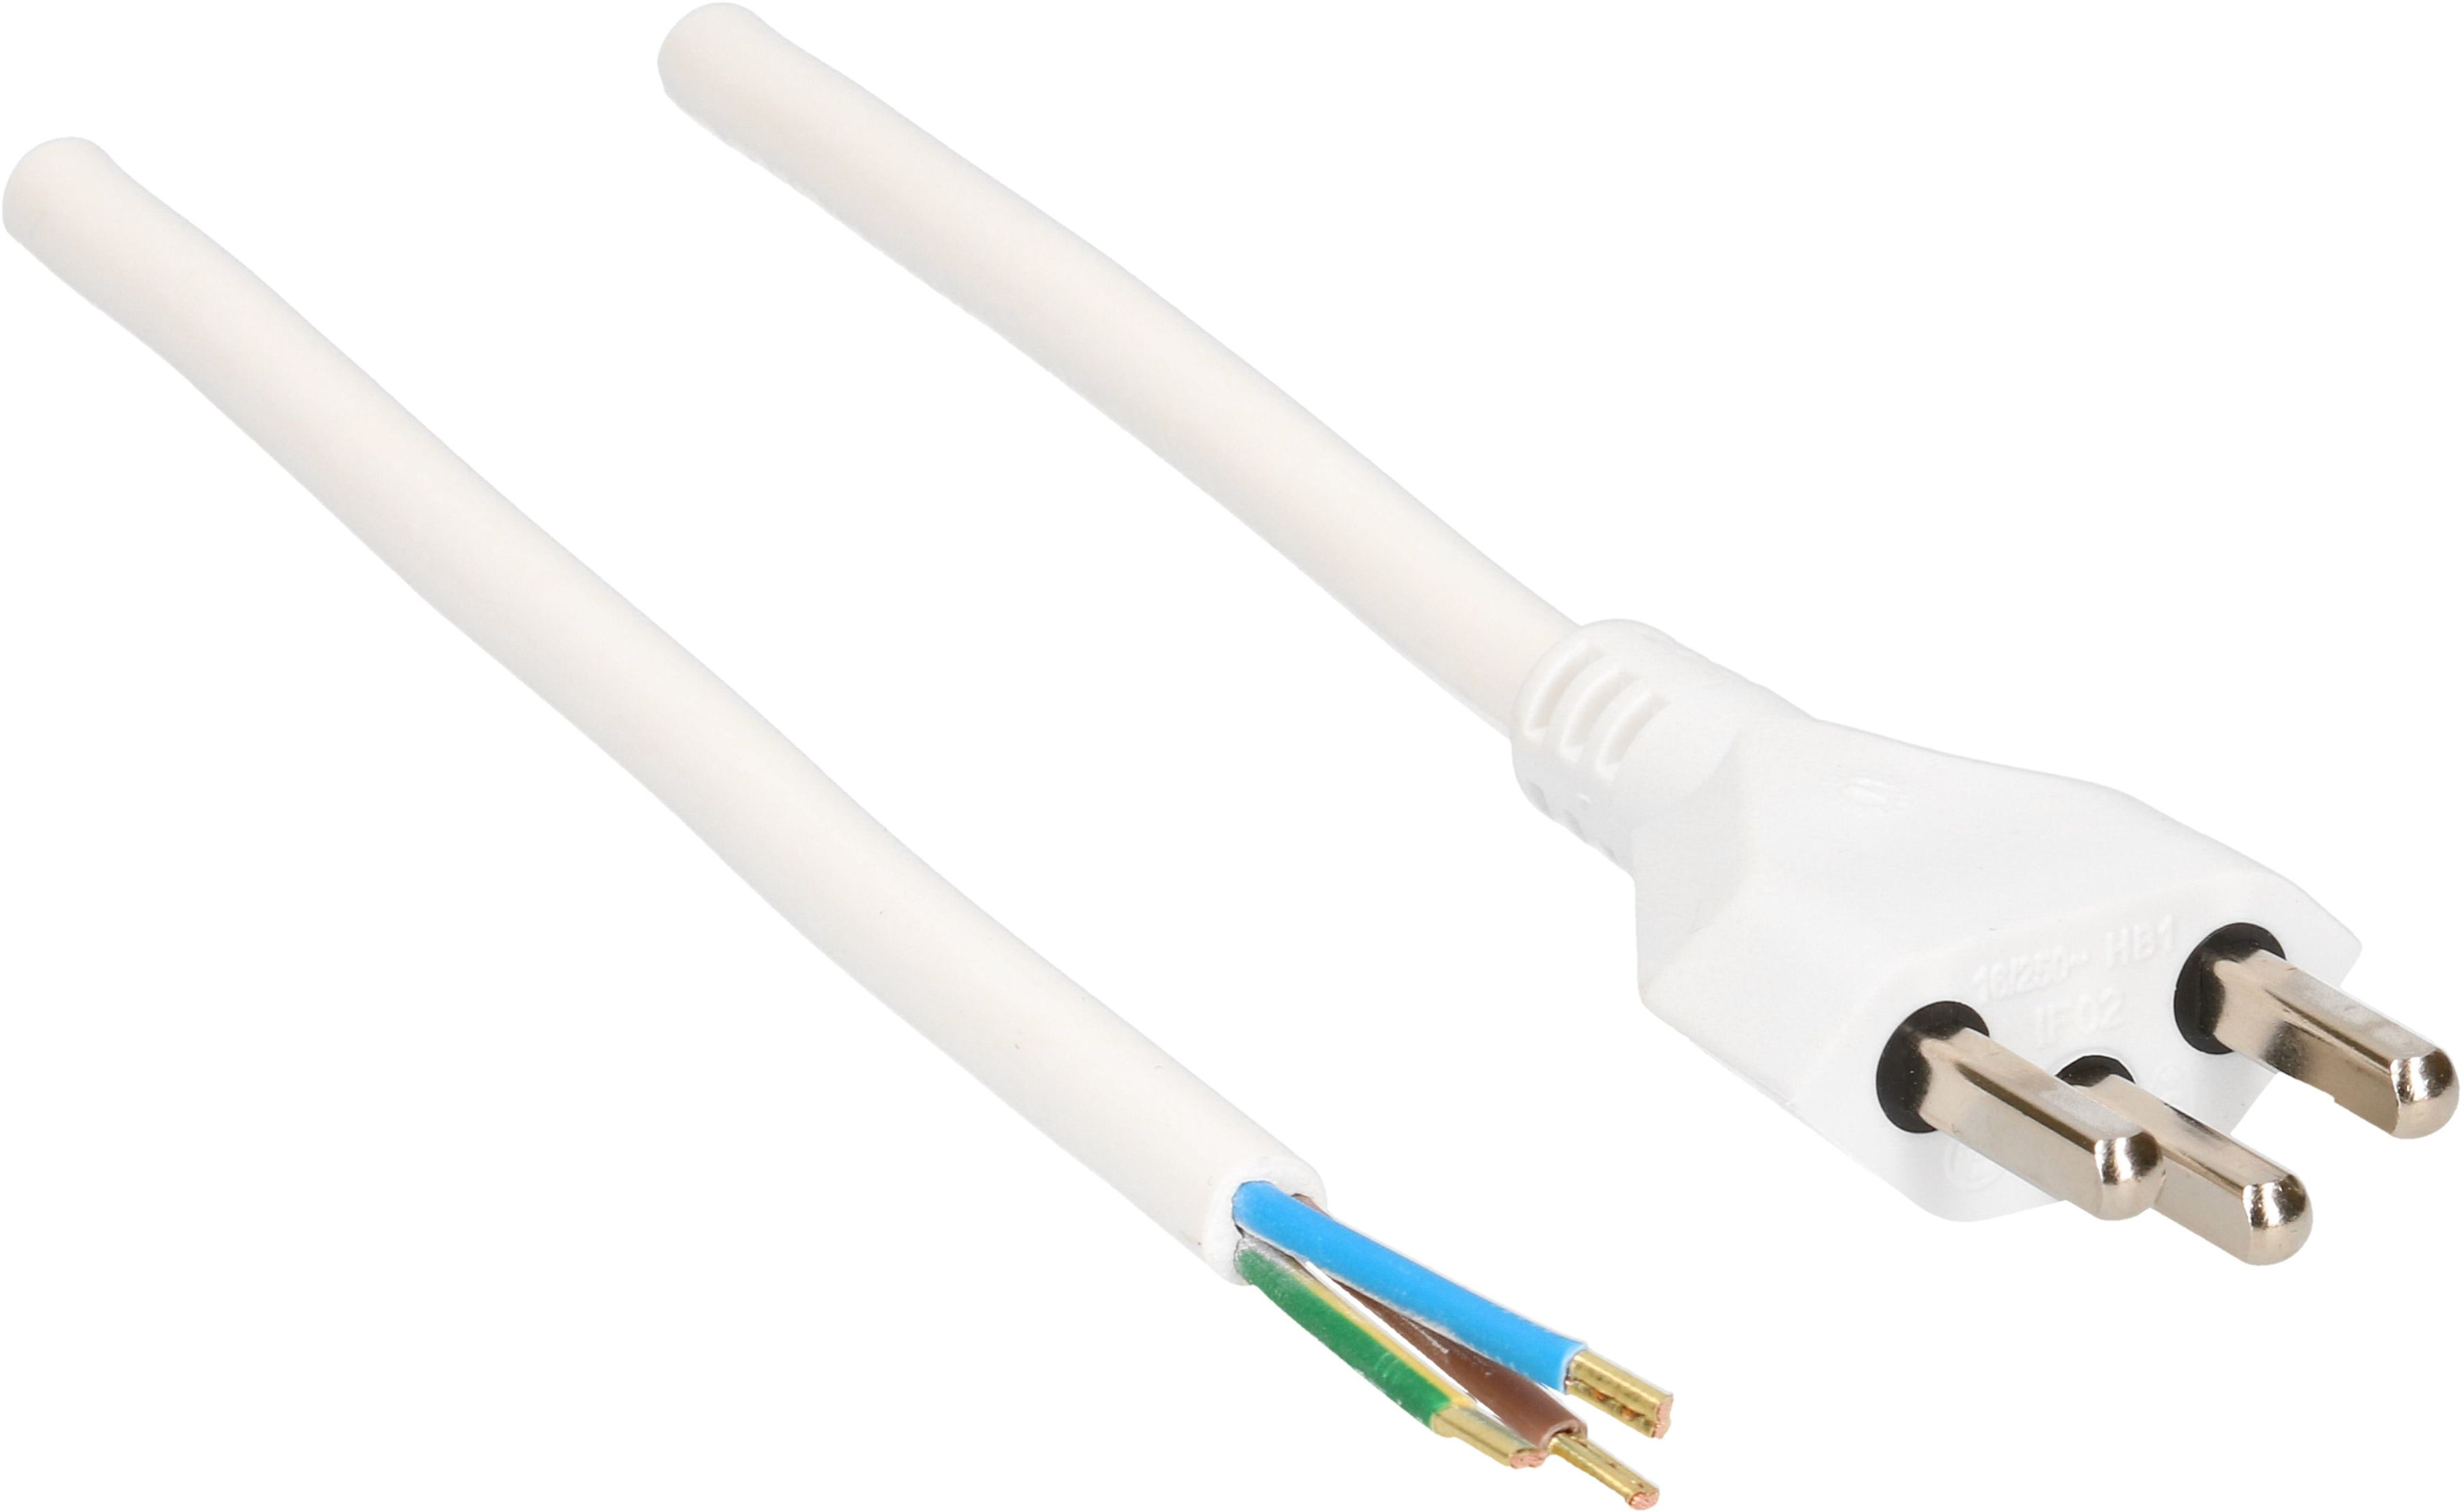 Cable cordset H05VV-F3G1.5mm2 white